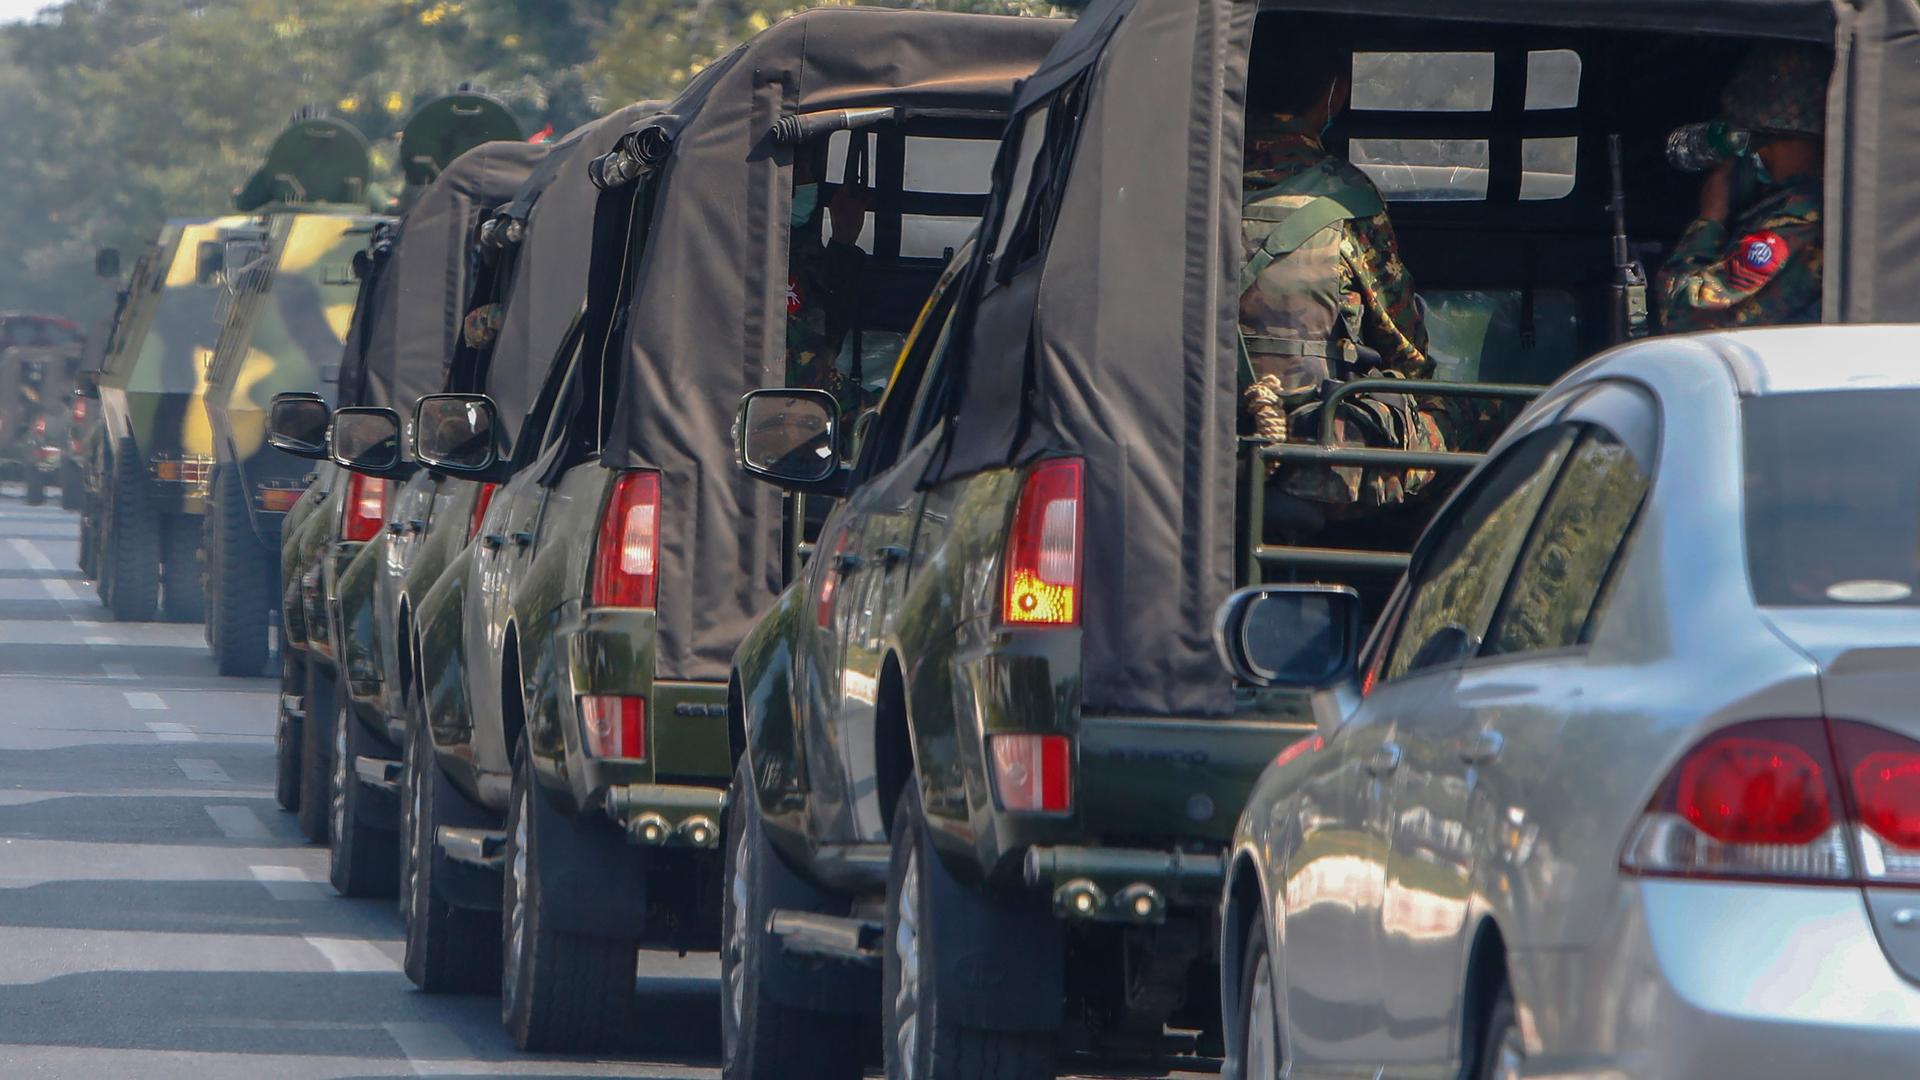 A long ling of military vehicles are shown painted in green-colored camoflage driving on a road.